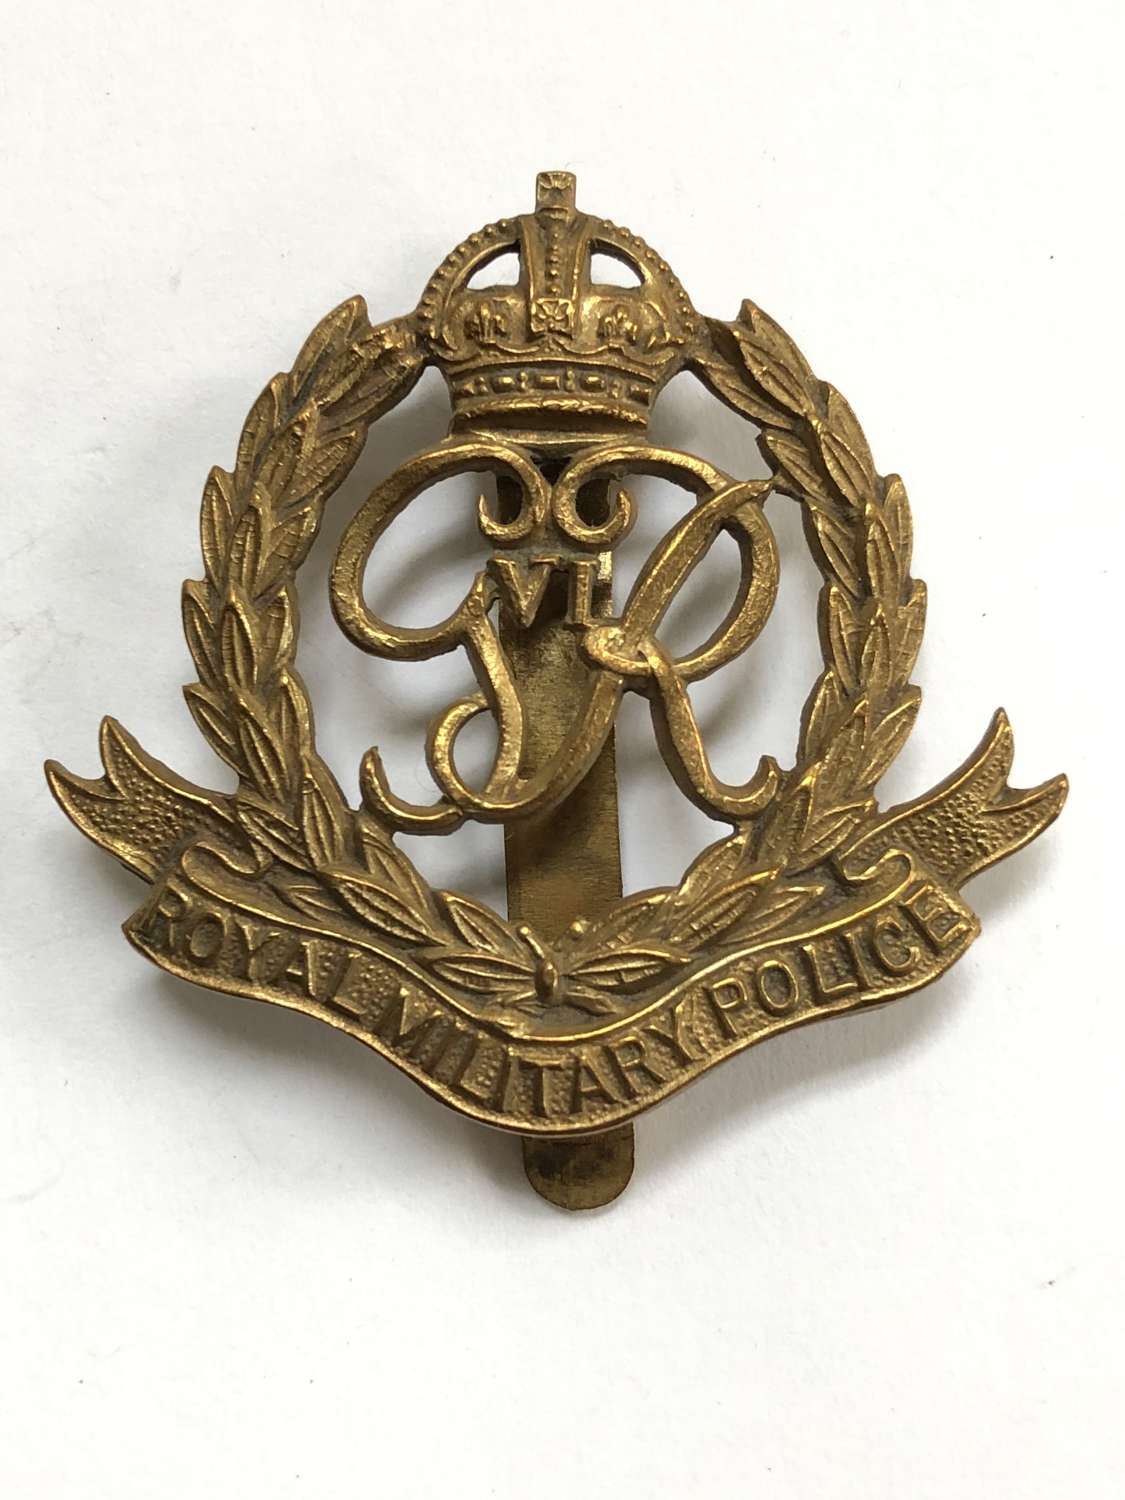 Royal Military Police OR’s cap badge circa 1946-52 by Gaunt, London